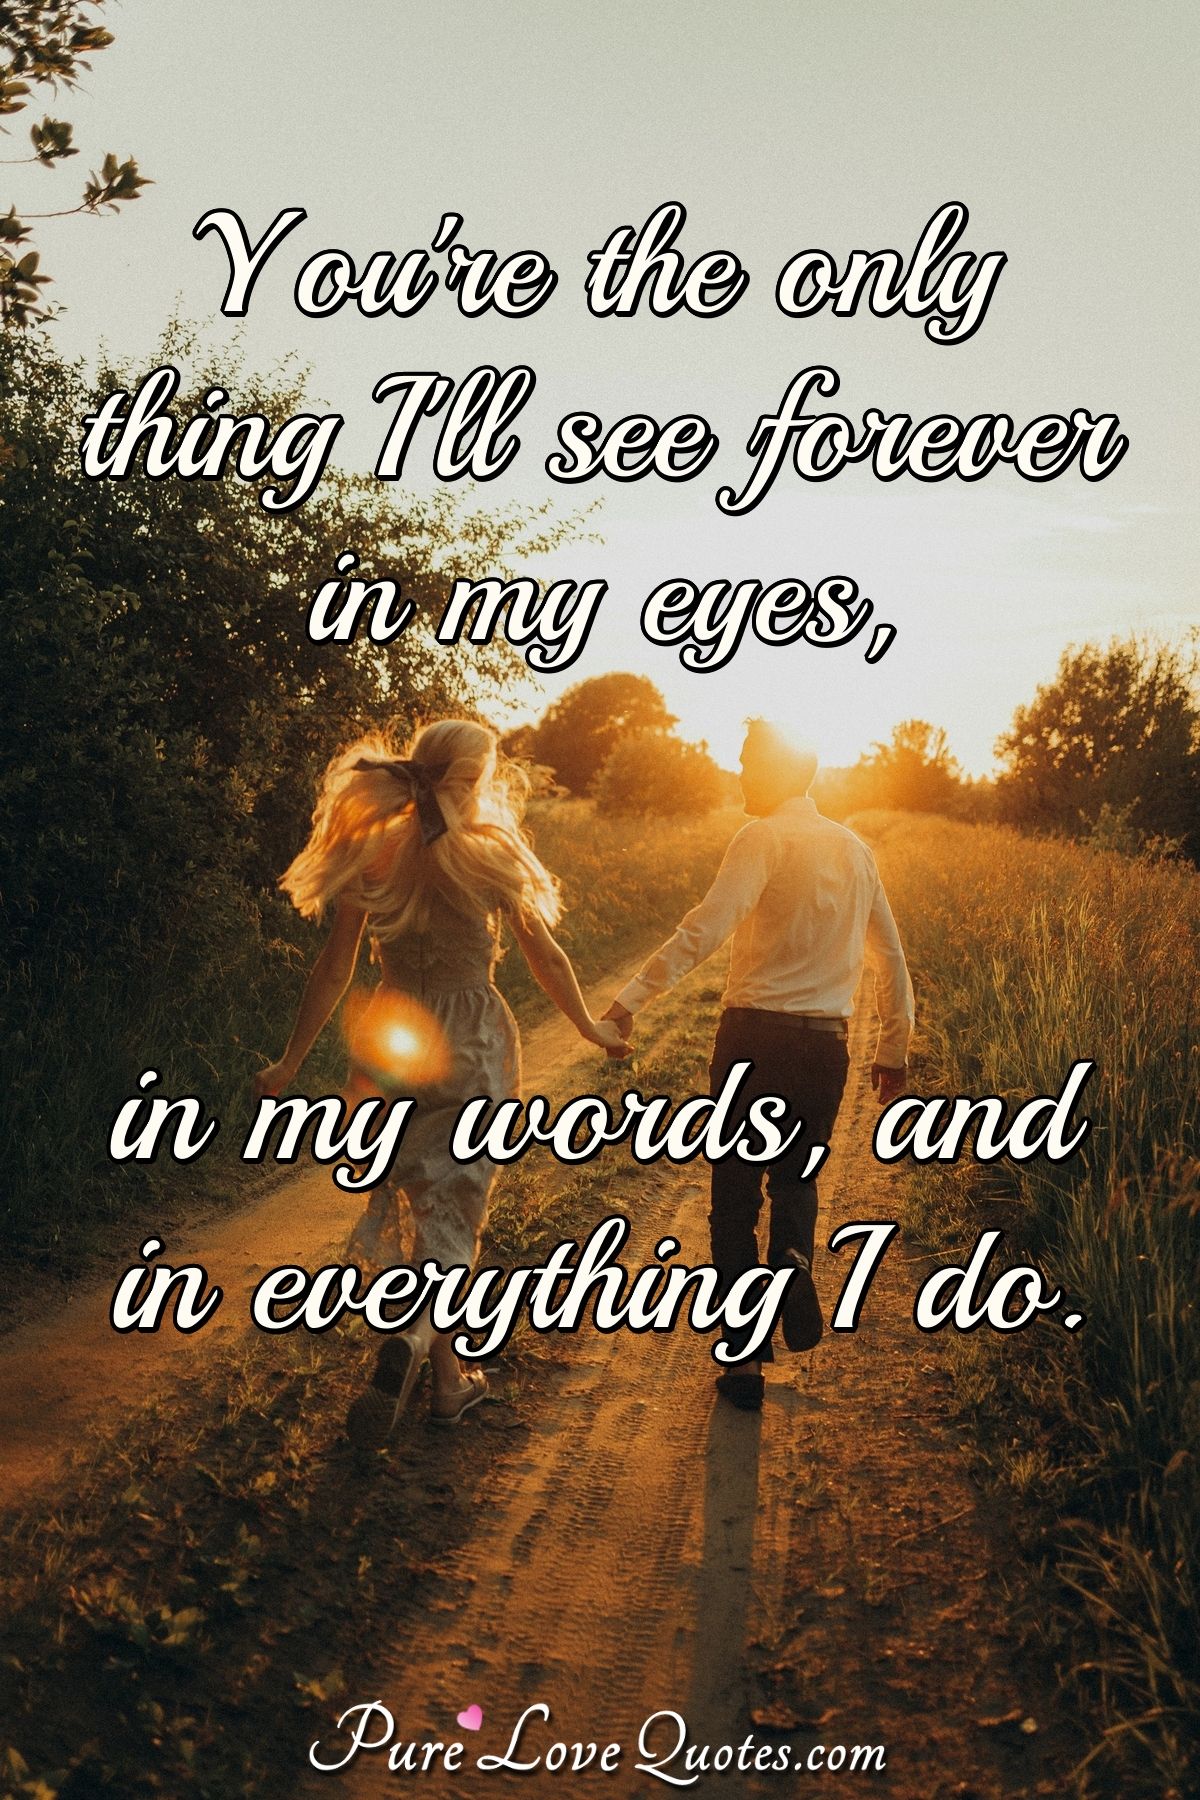 You're the only thing I'll see forever in my eyes, in my words, and in everything I do - Anonymous